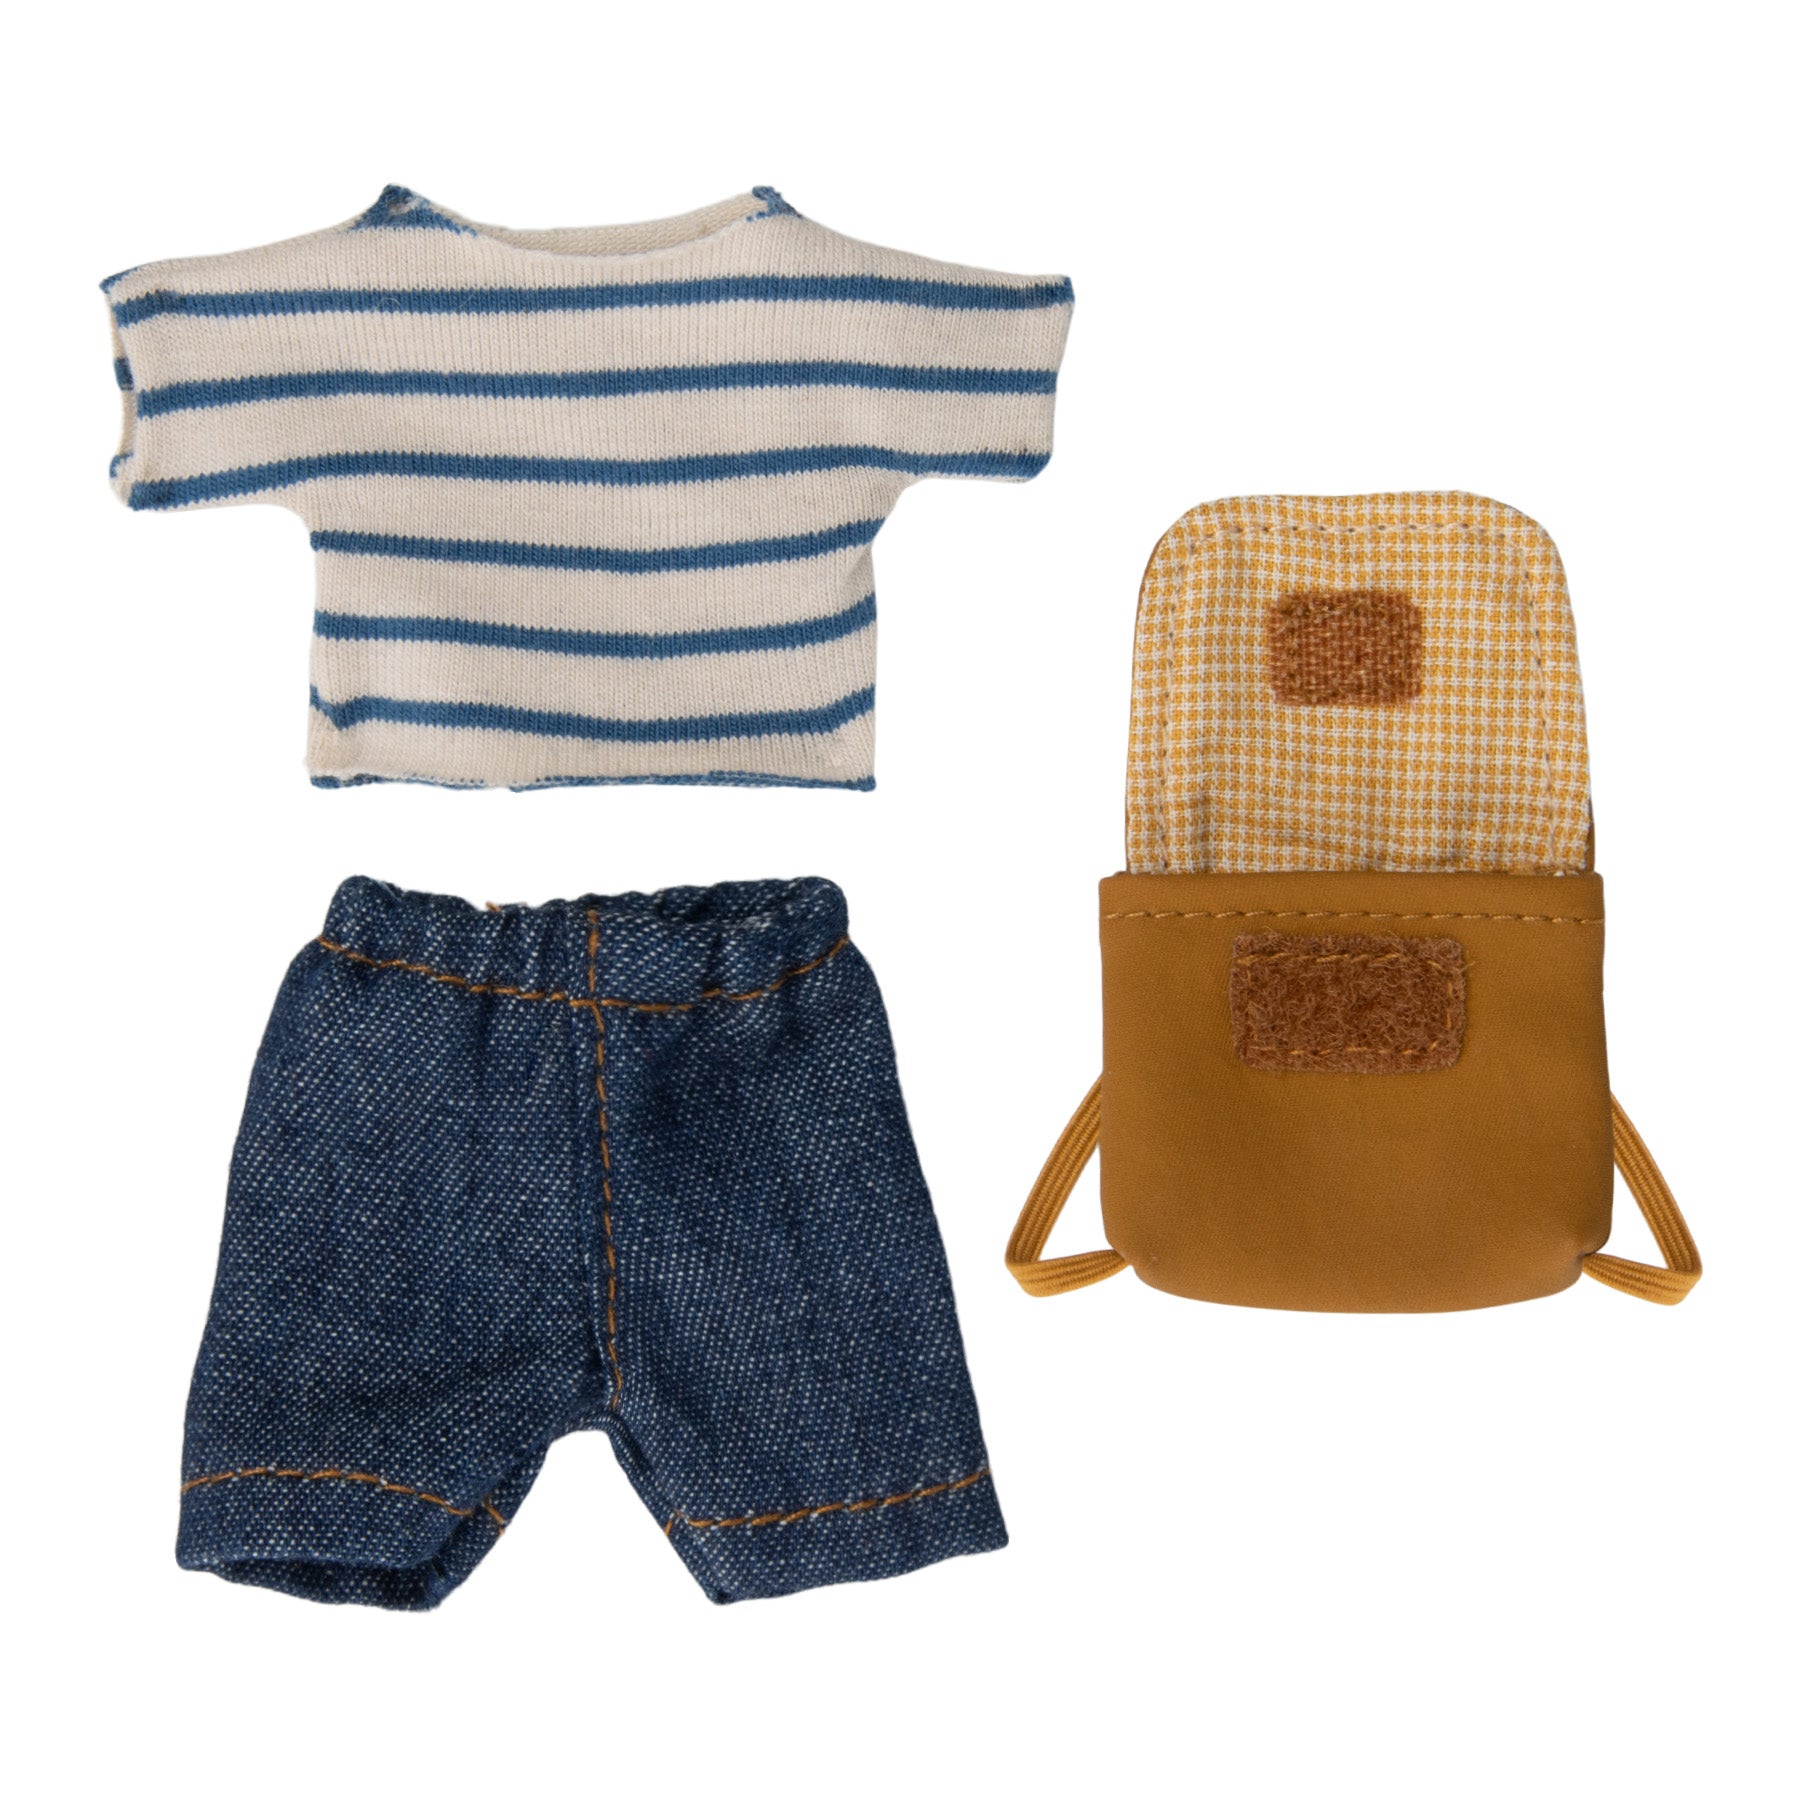 Maileg mouse accessories, including a stripy top, jeans and a rucksack